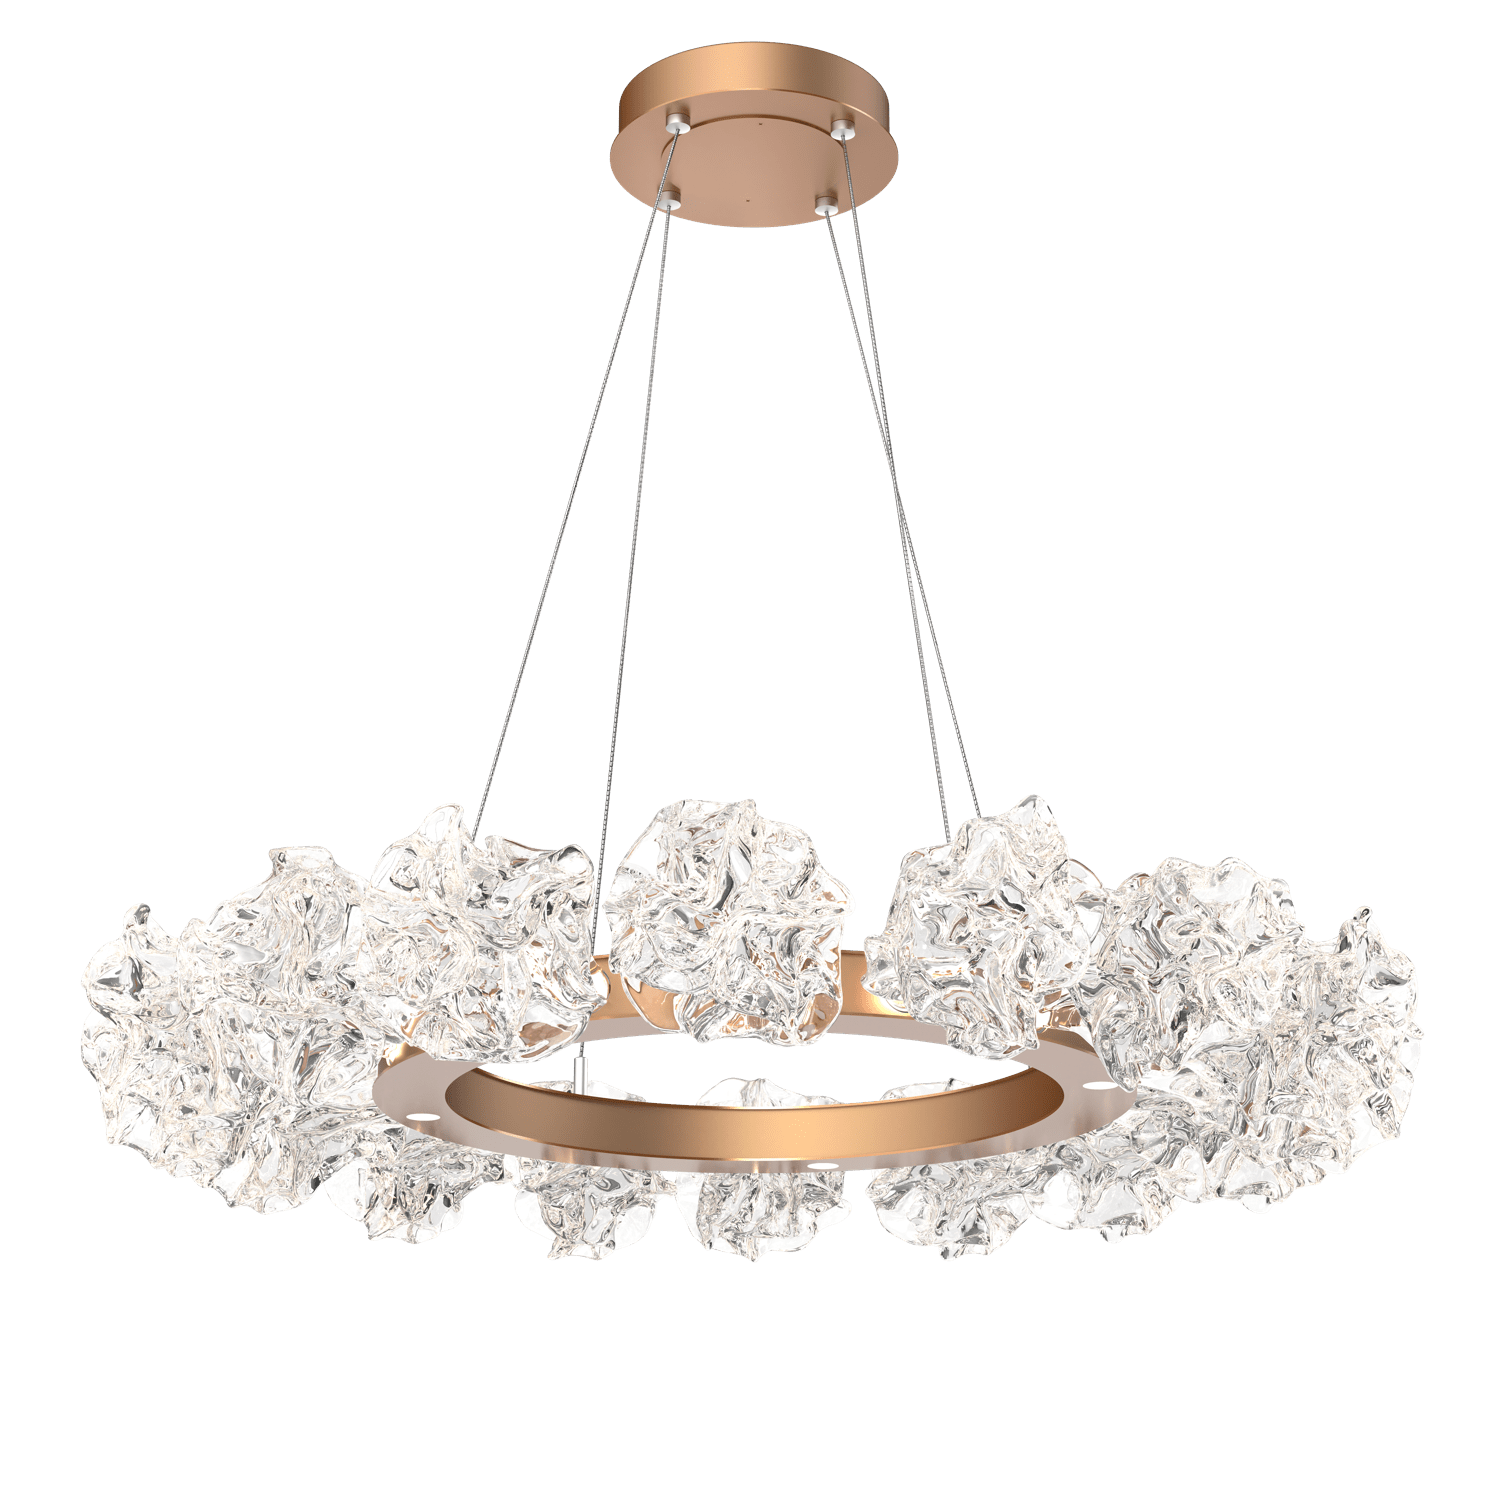 CHB0059-36-NB-Hammerton-Studio-Blossom-36-inch-radial-ring-chandelier-with-novel-brass-finish-and-clear-handblown-crystal-glass-shades-and-LED-lamping